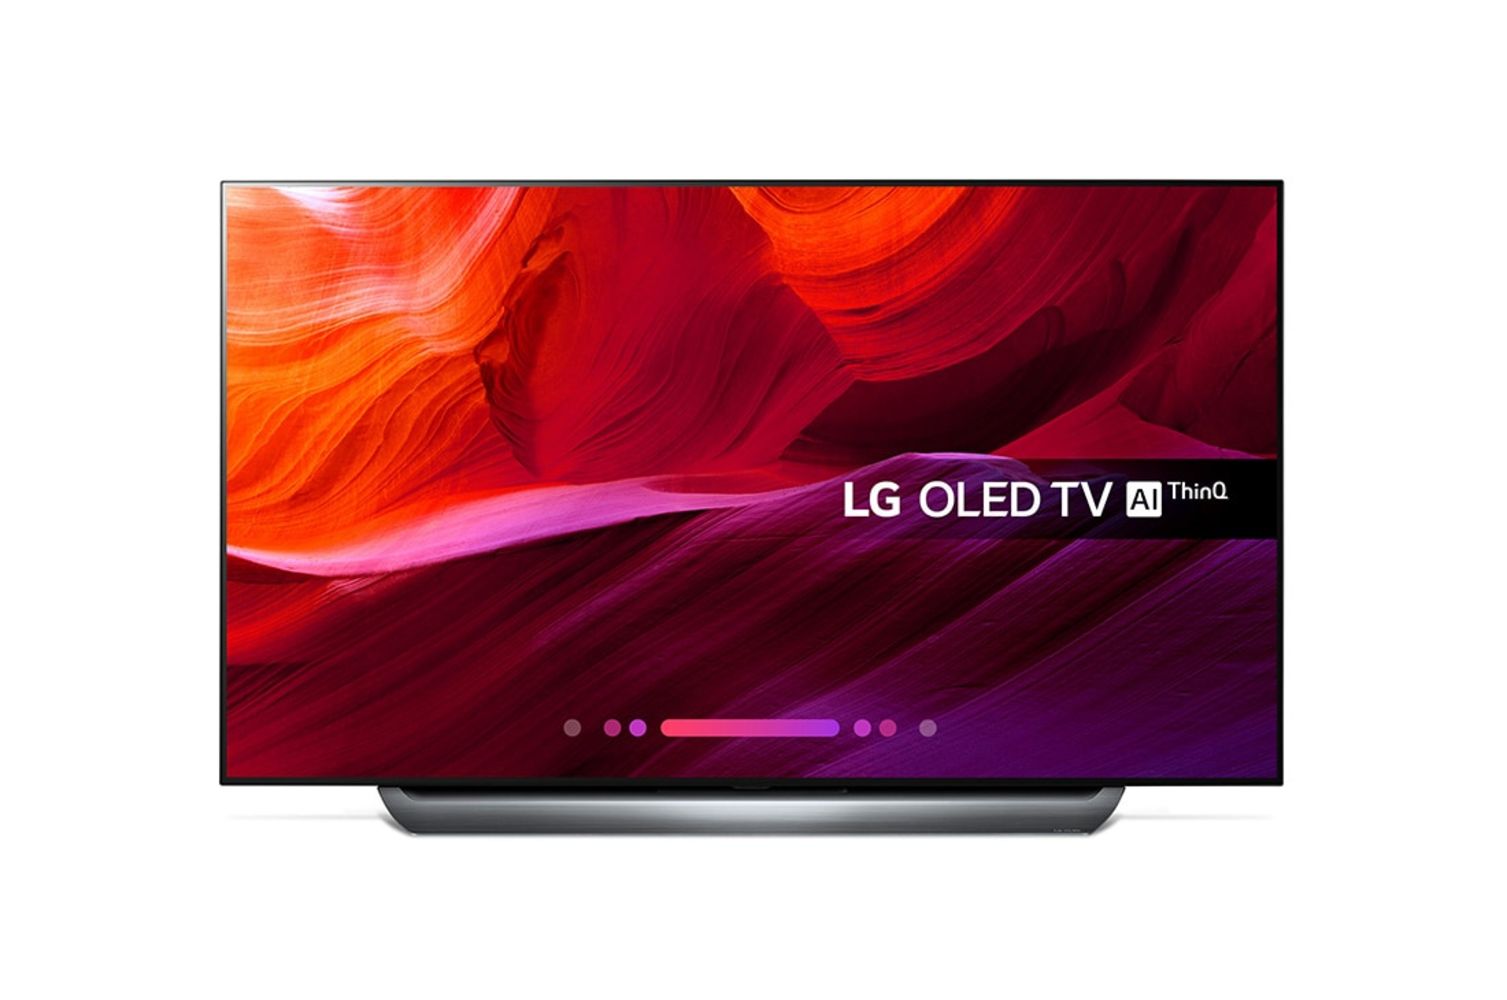 LG TVs & Monitors - Including 4k Ultra HD TVs in a Range of Screen Sizes